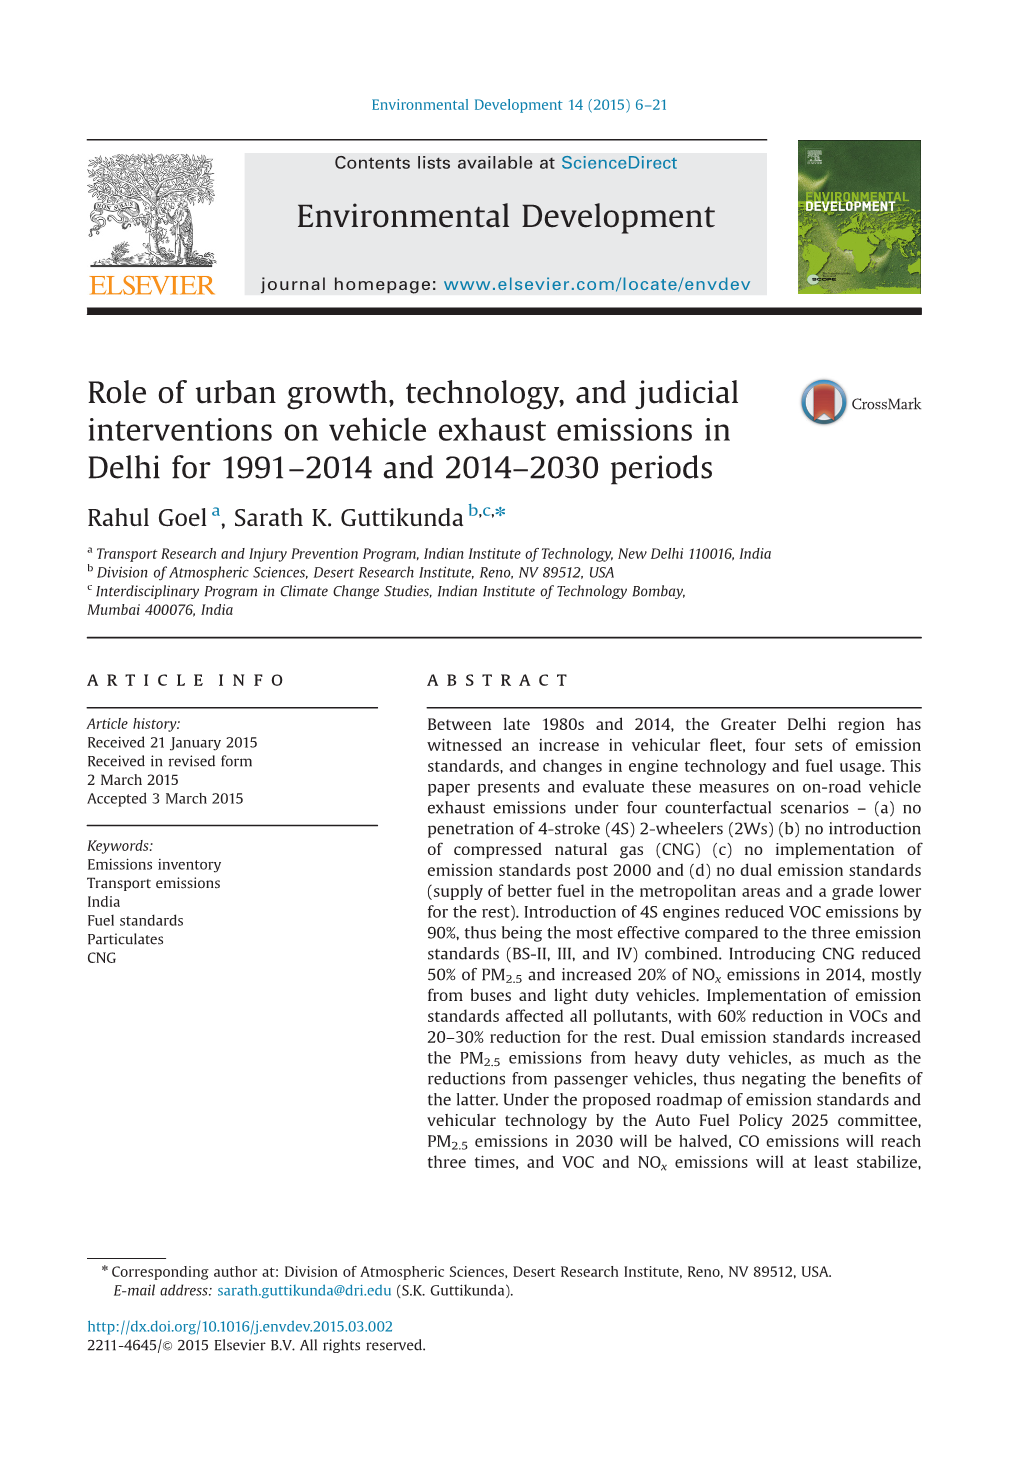 Role of Urban Growth, Technology, and Judicial Interventions on Vehicle Exhaust Emissions in Delhi for 1991–2014 and 2014–2030 Periods